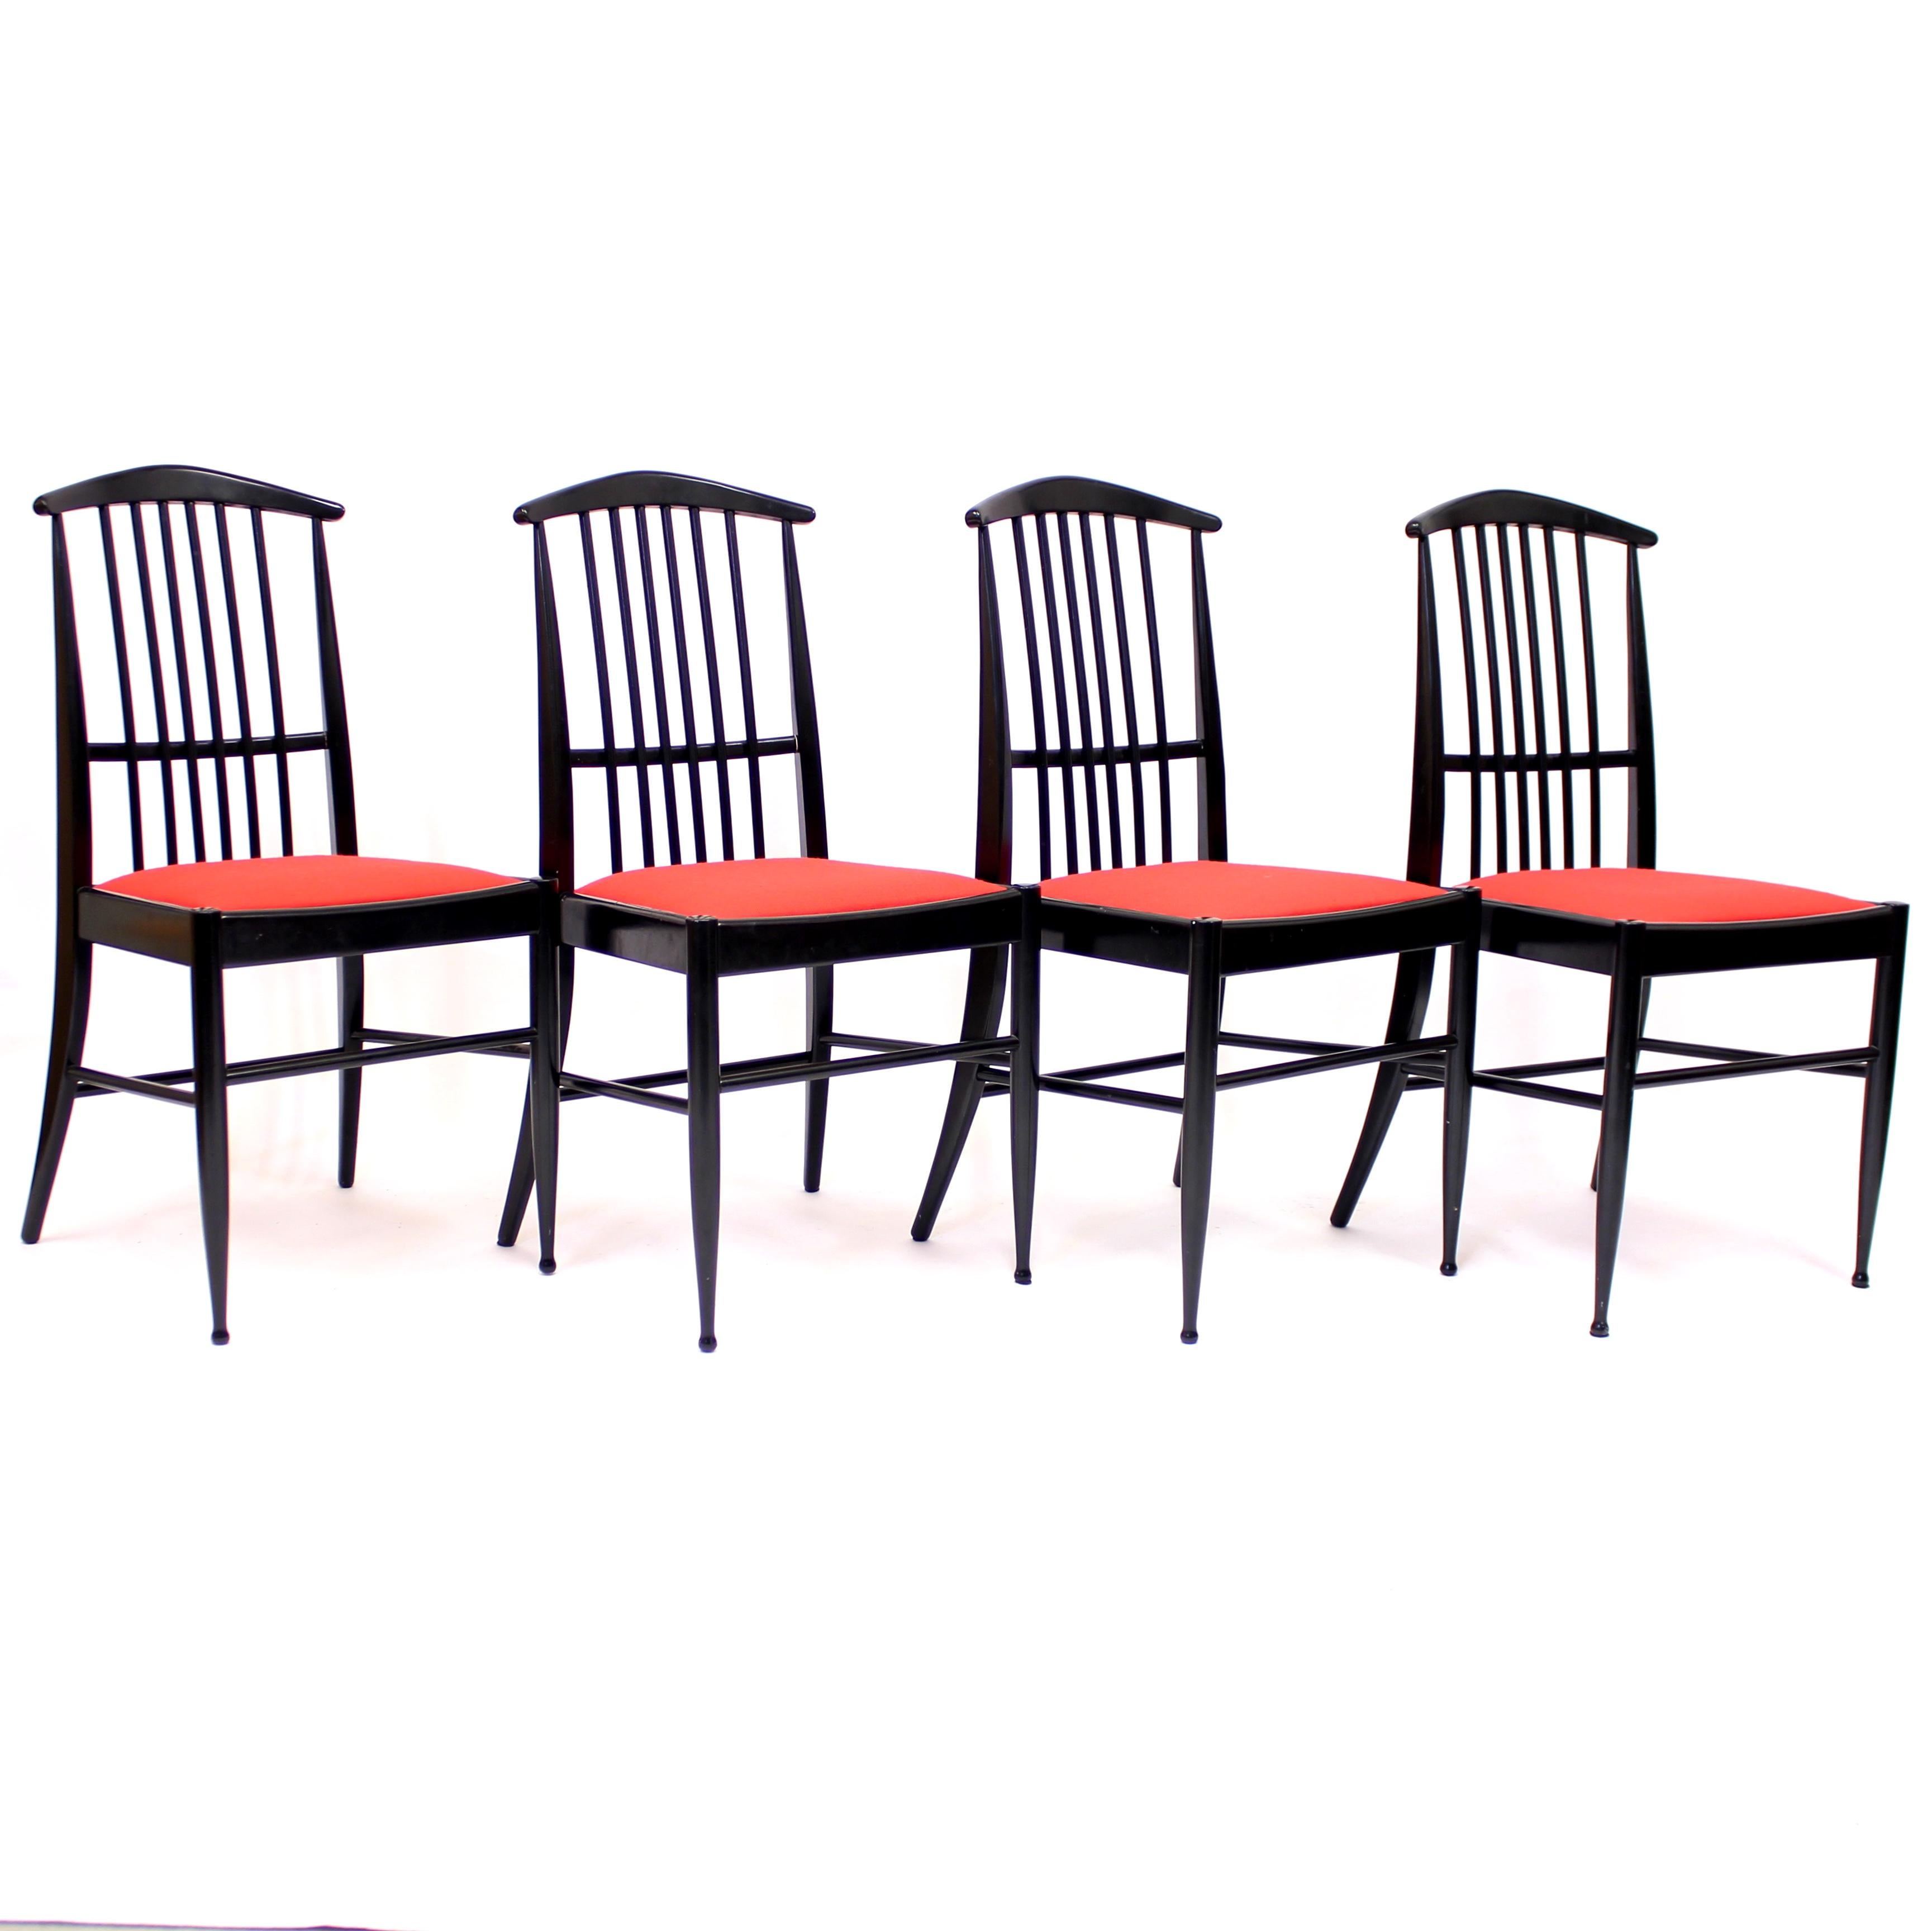 Late 20th Century Kerstin Hörlin-Holmquist, set of 4 Charlotte dining chairs, ASKO, 1970s For Sale